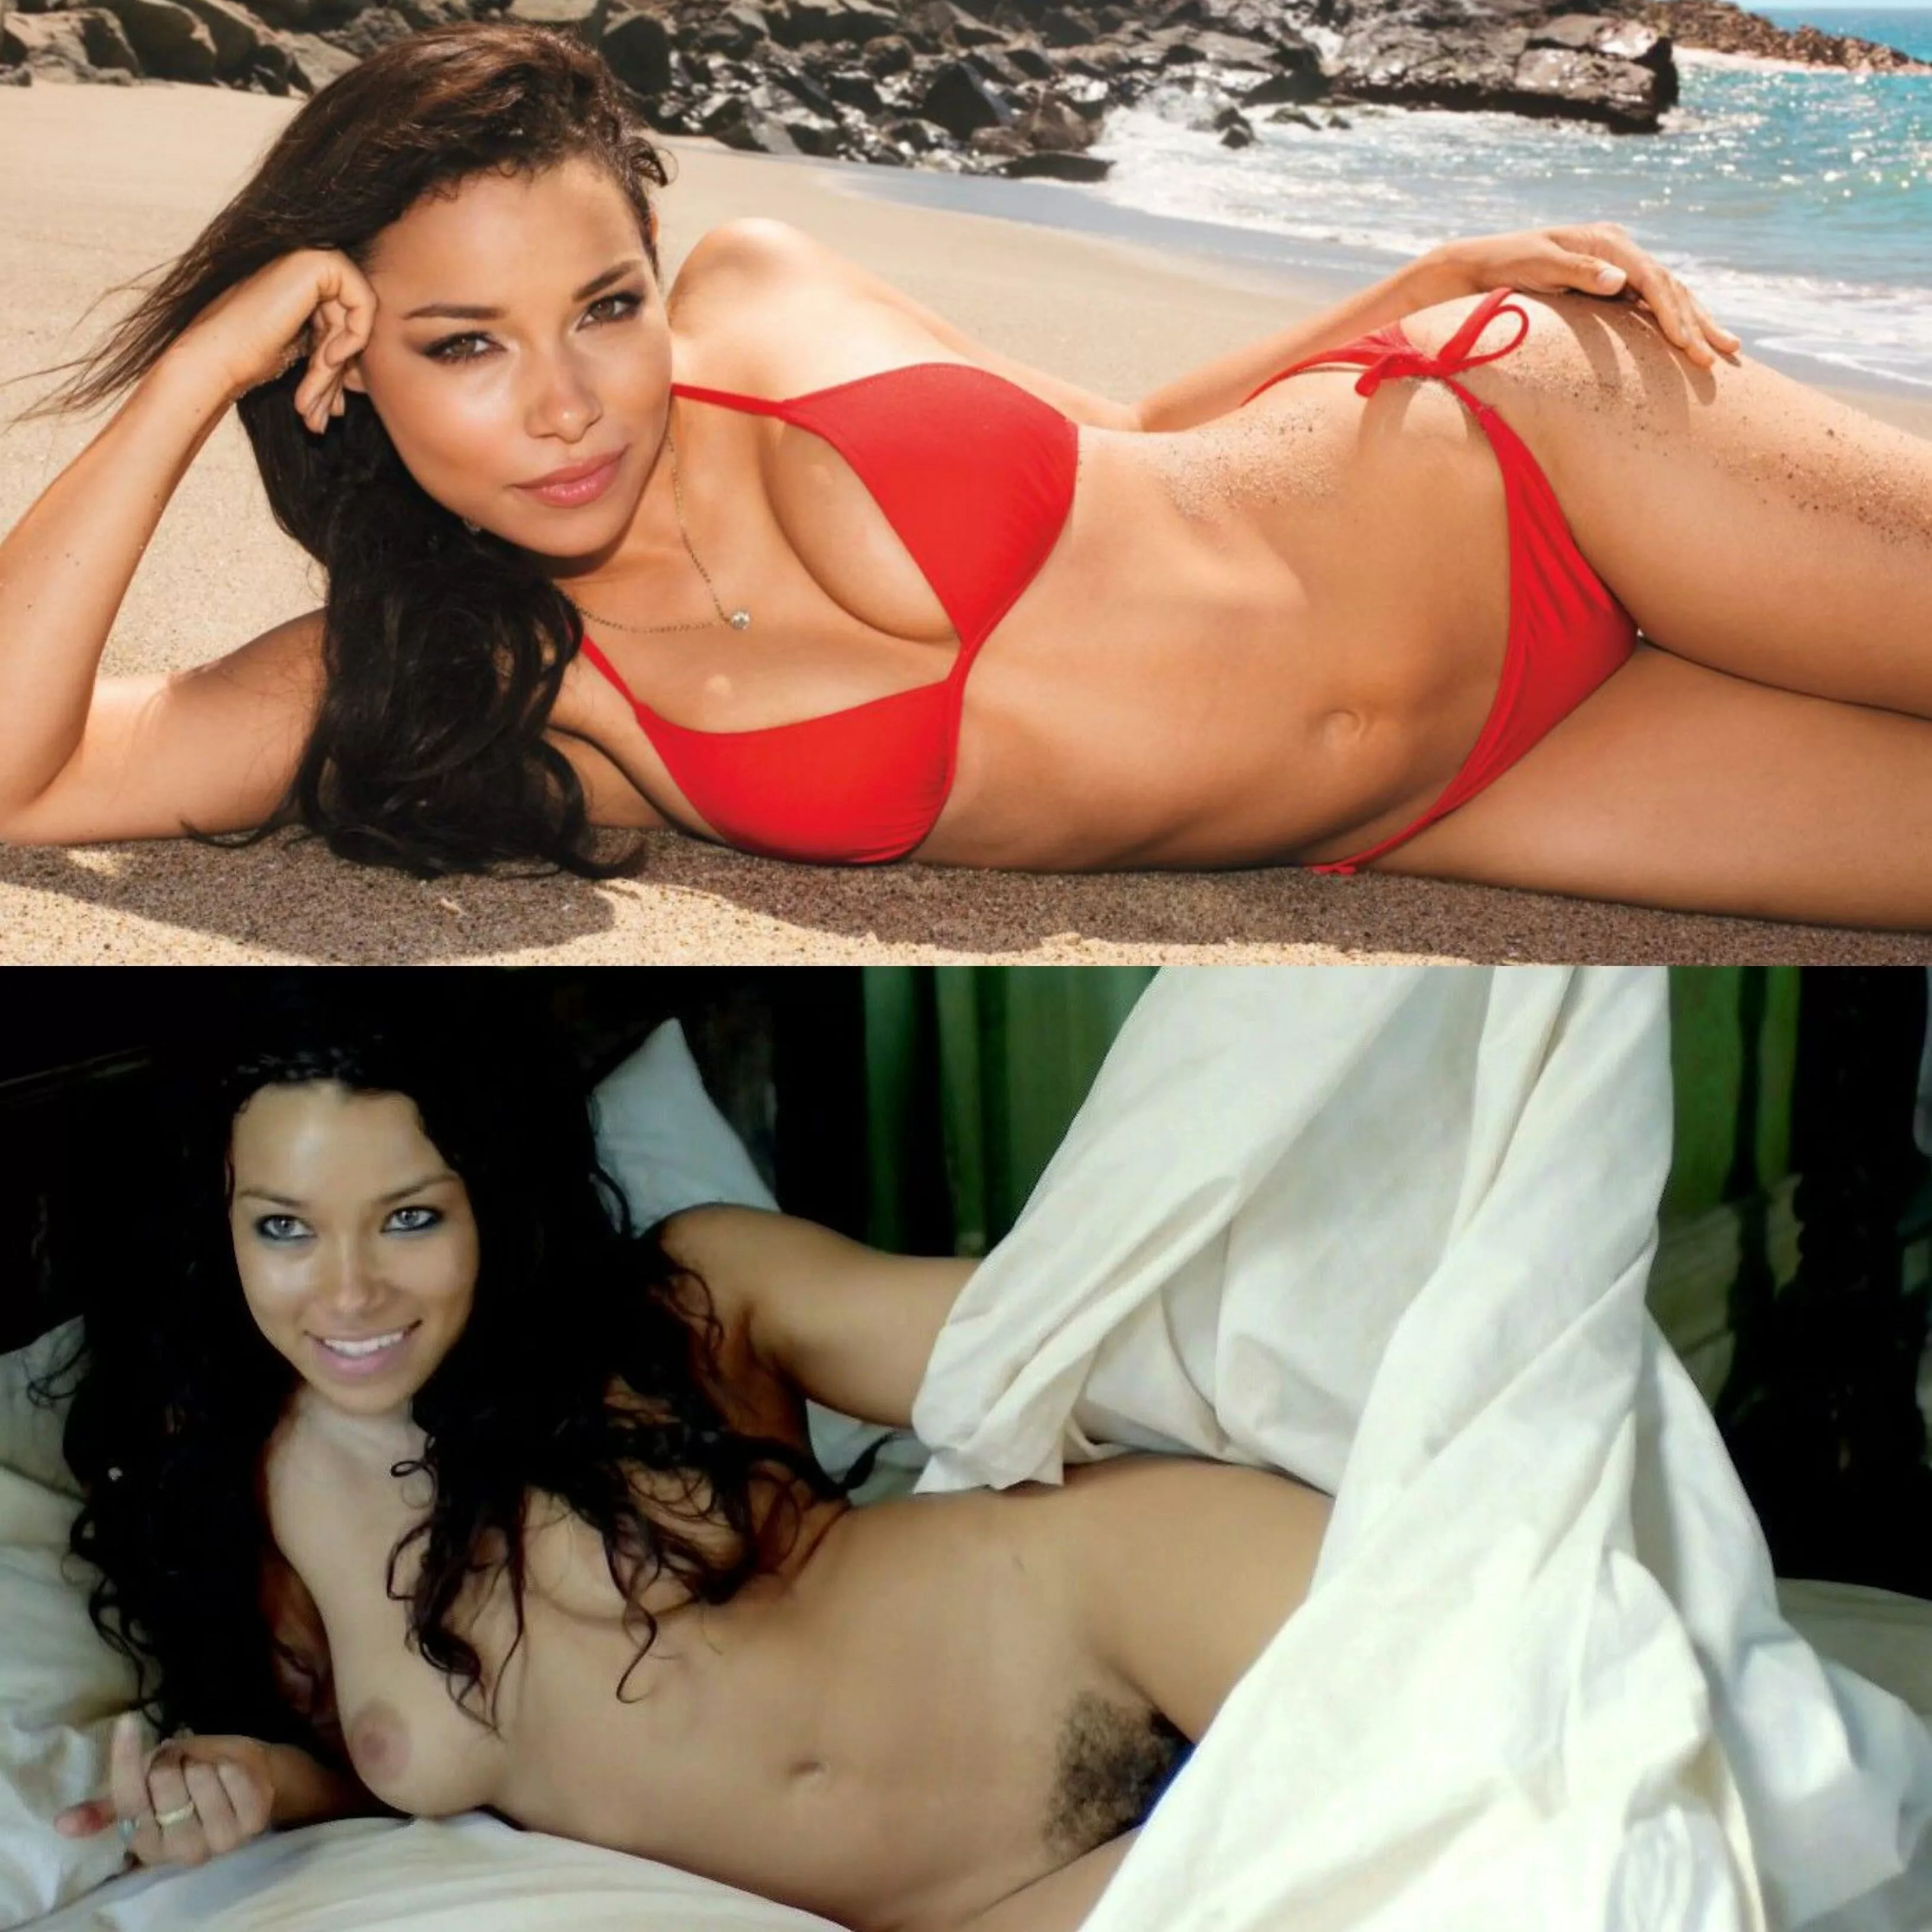 Jessica parker kennedy ever been nude